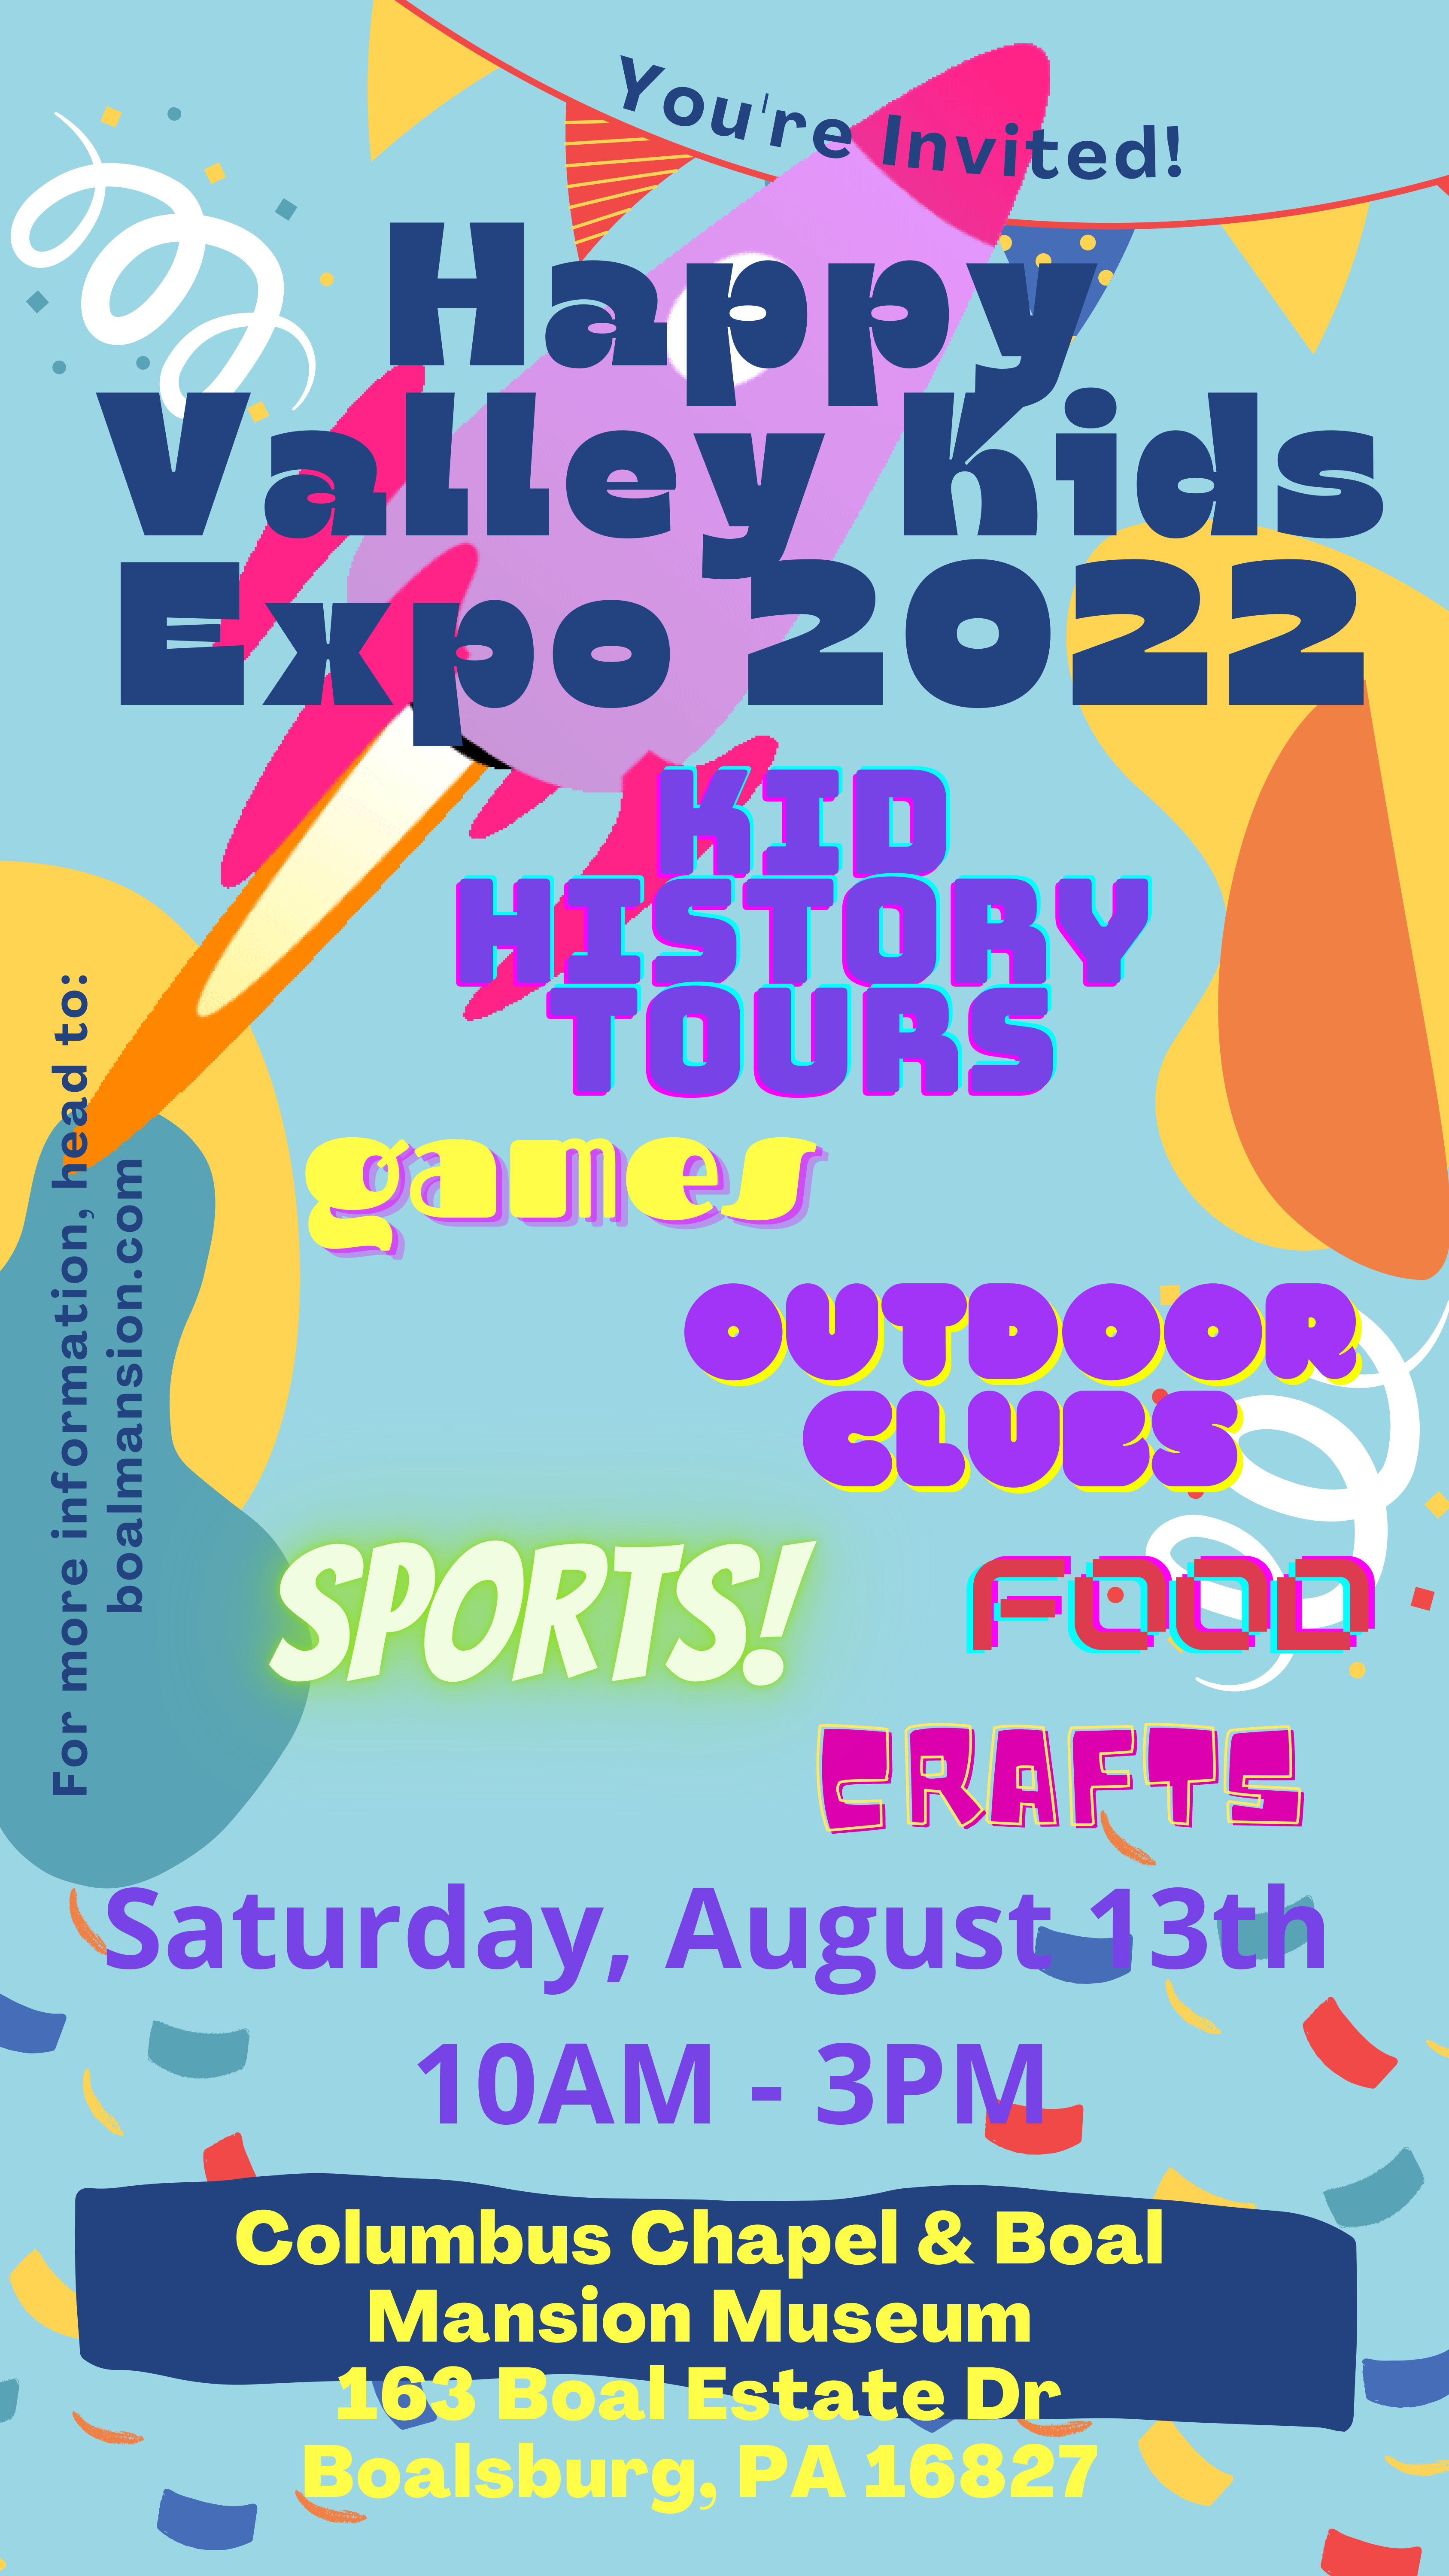 Kids Expo Saturday, Aug 13 August 8, 2022